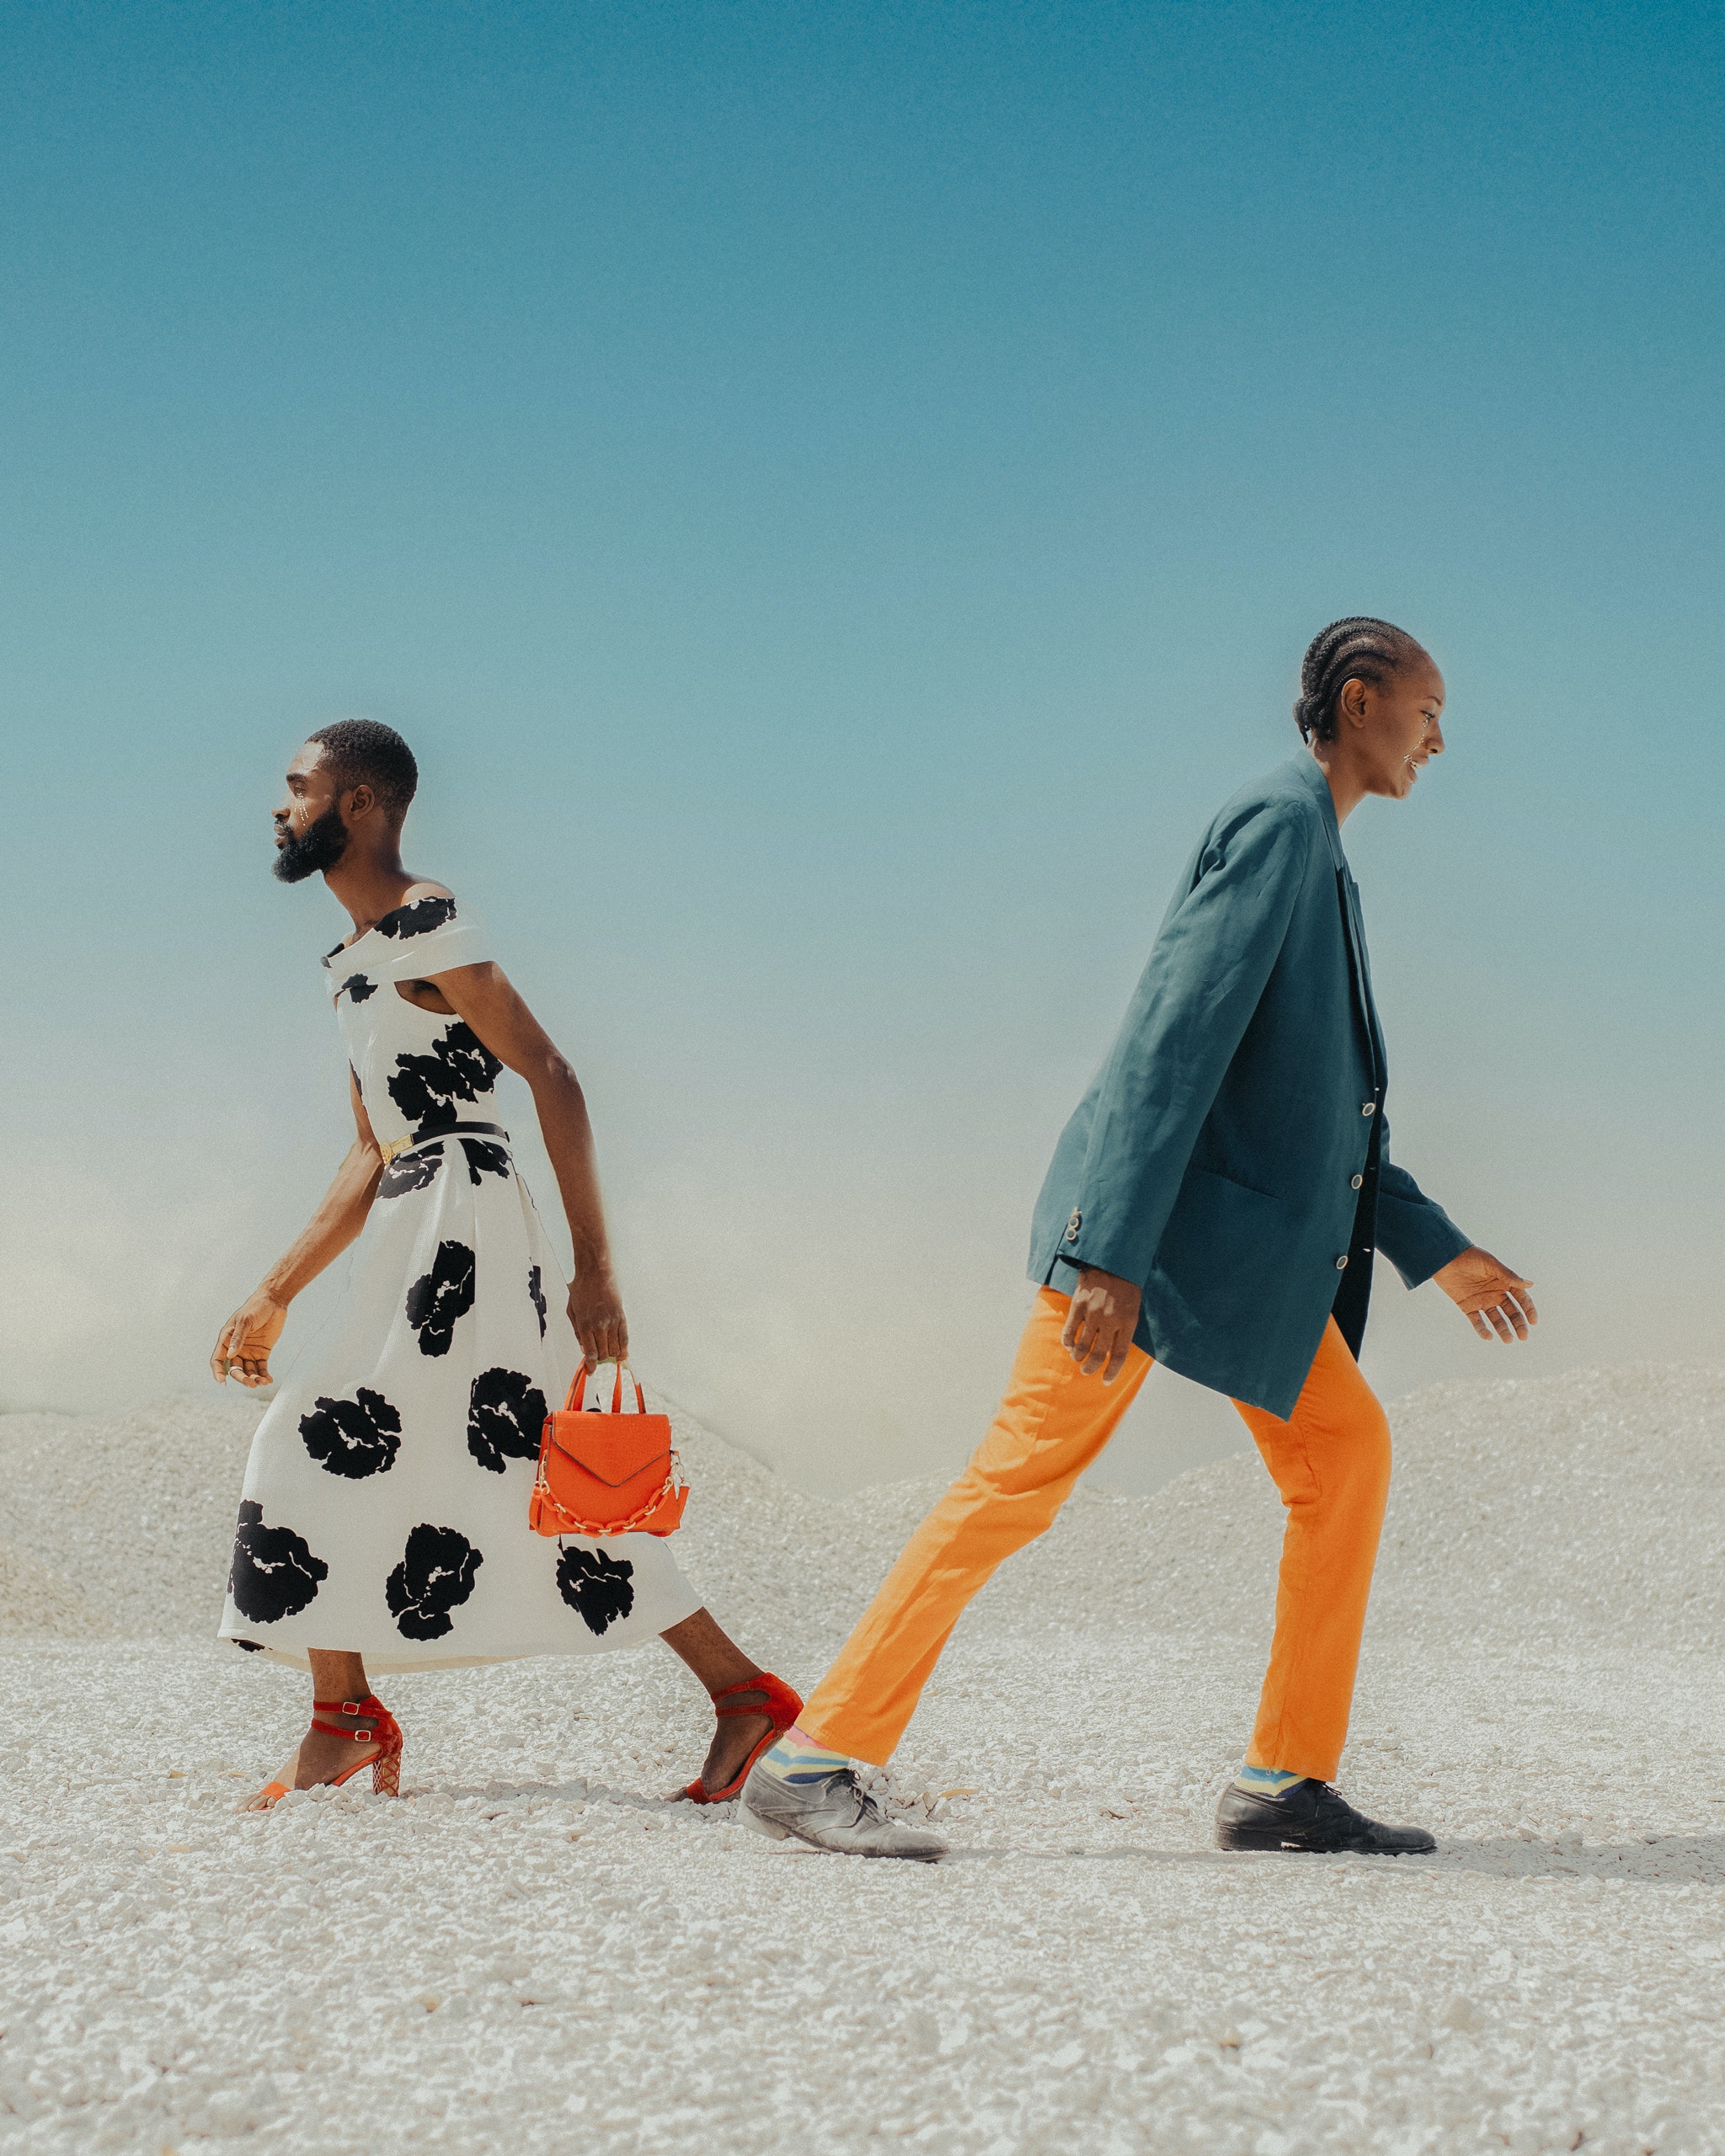 A woman wearing a suit and a man wearing a dress walking in opposite directions. | Source: Pexels